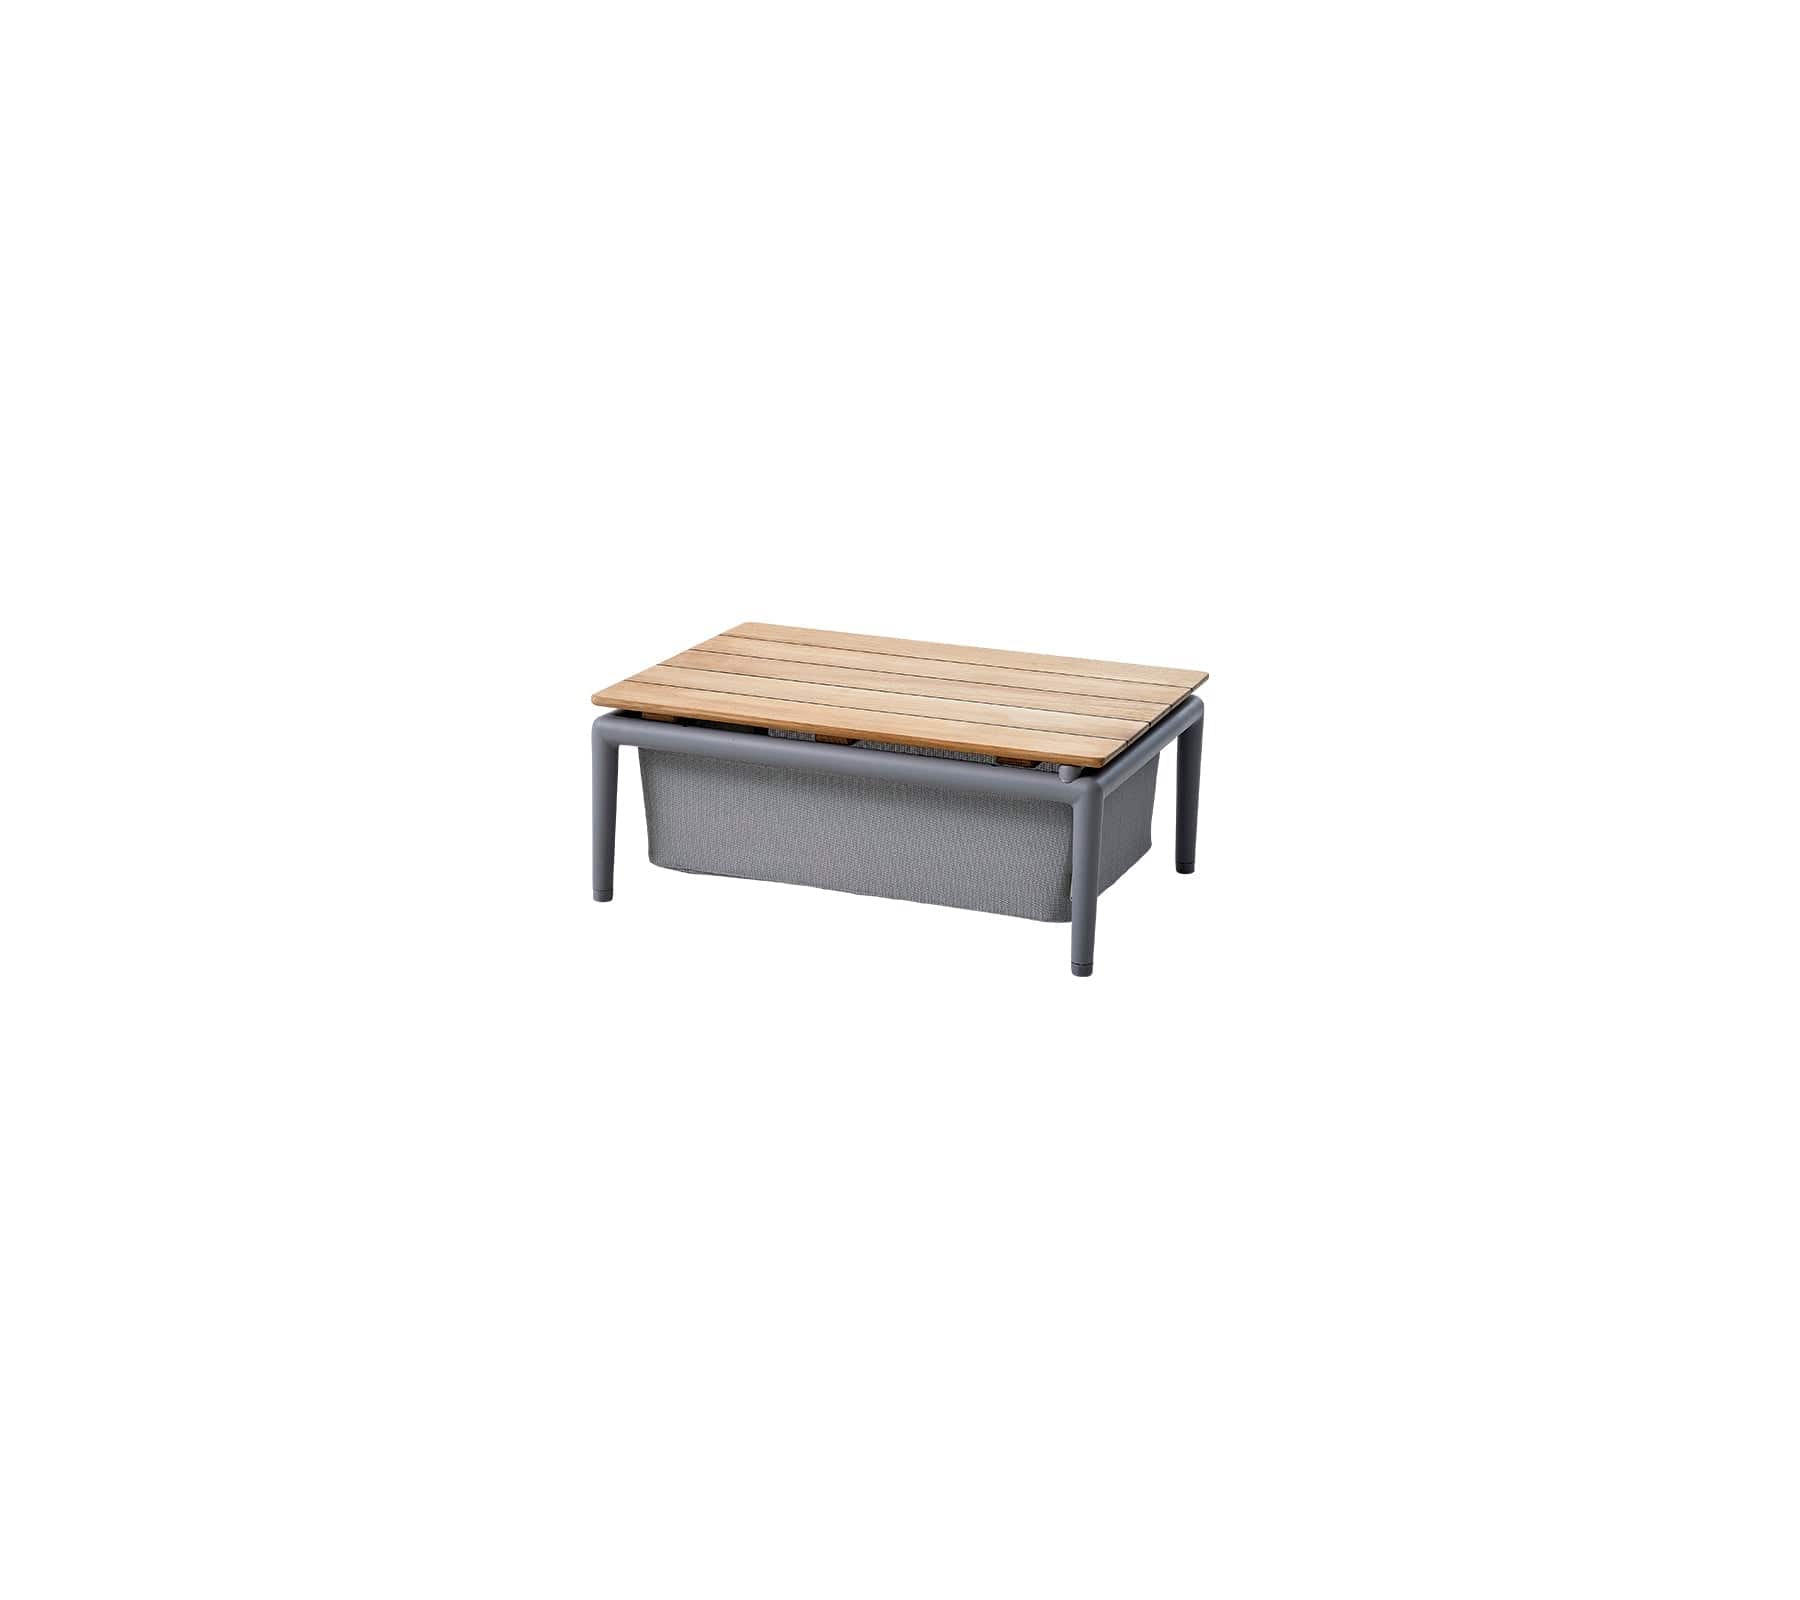 Cane-Line - Conic box table 29.2x20.5inches | 5037